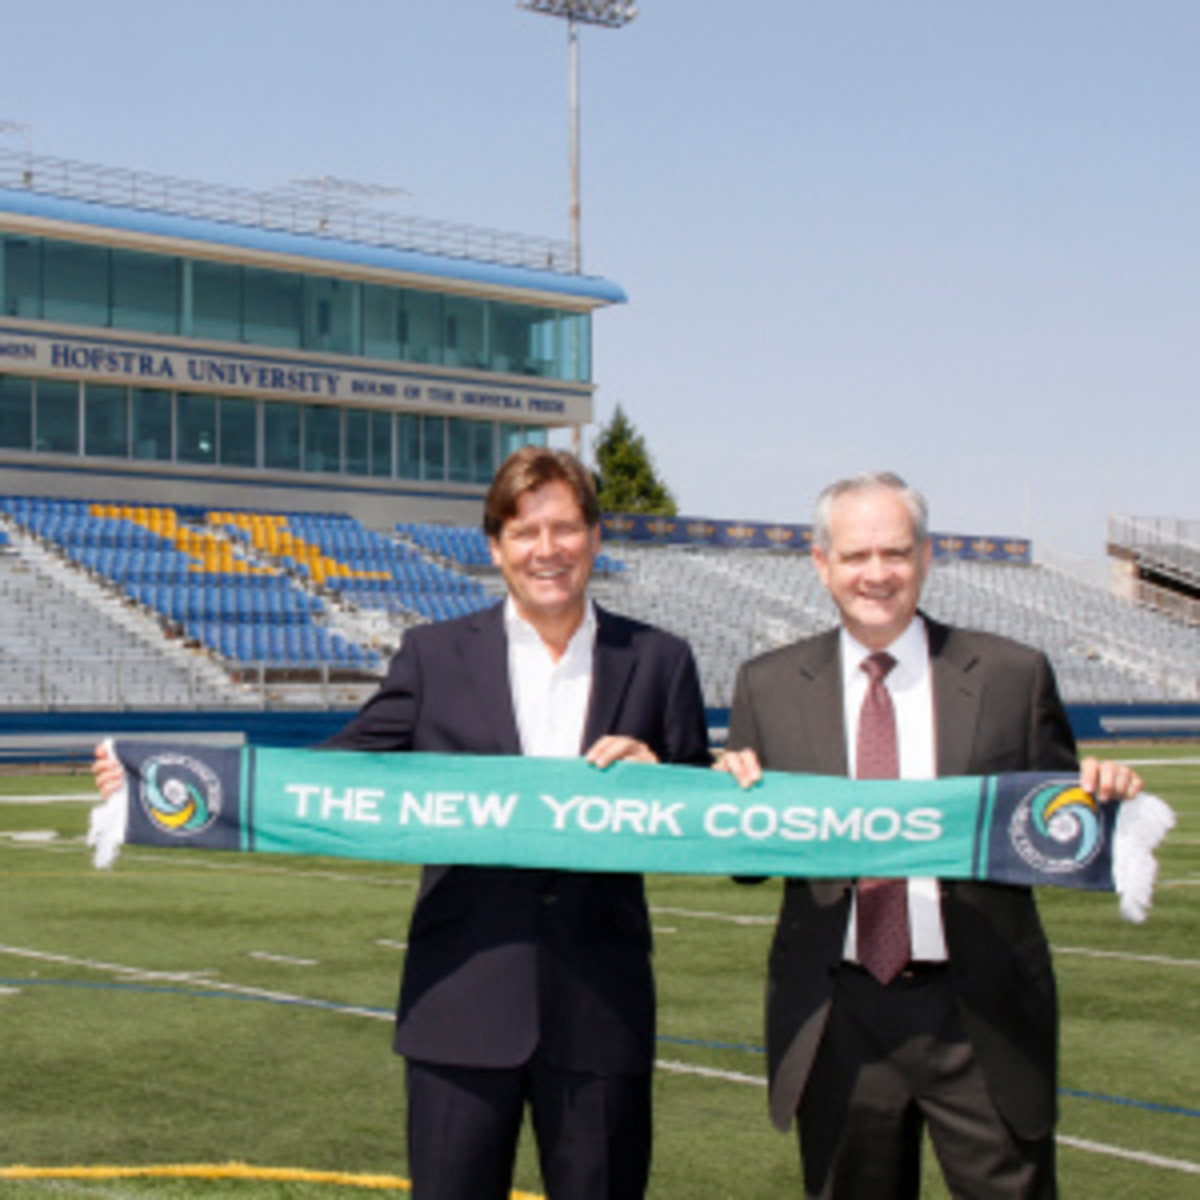 The New York Cosmos are set to play at Hofstra but could be getting a new $400 million stadium. (Janette Pellegrini)